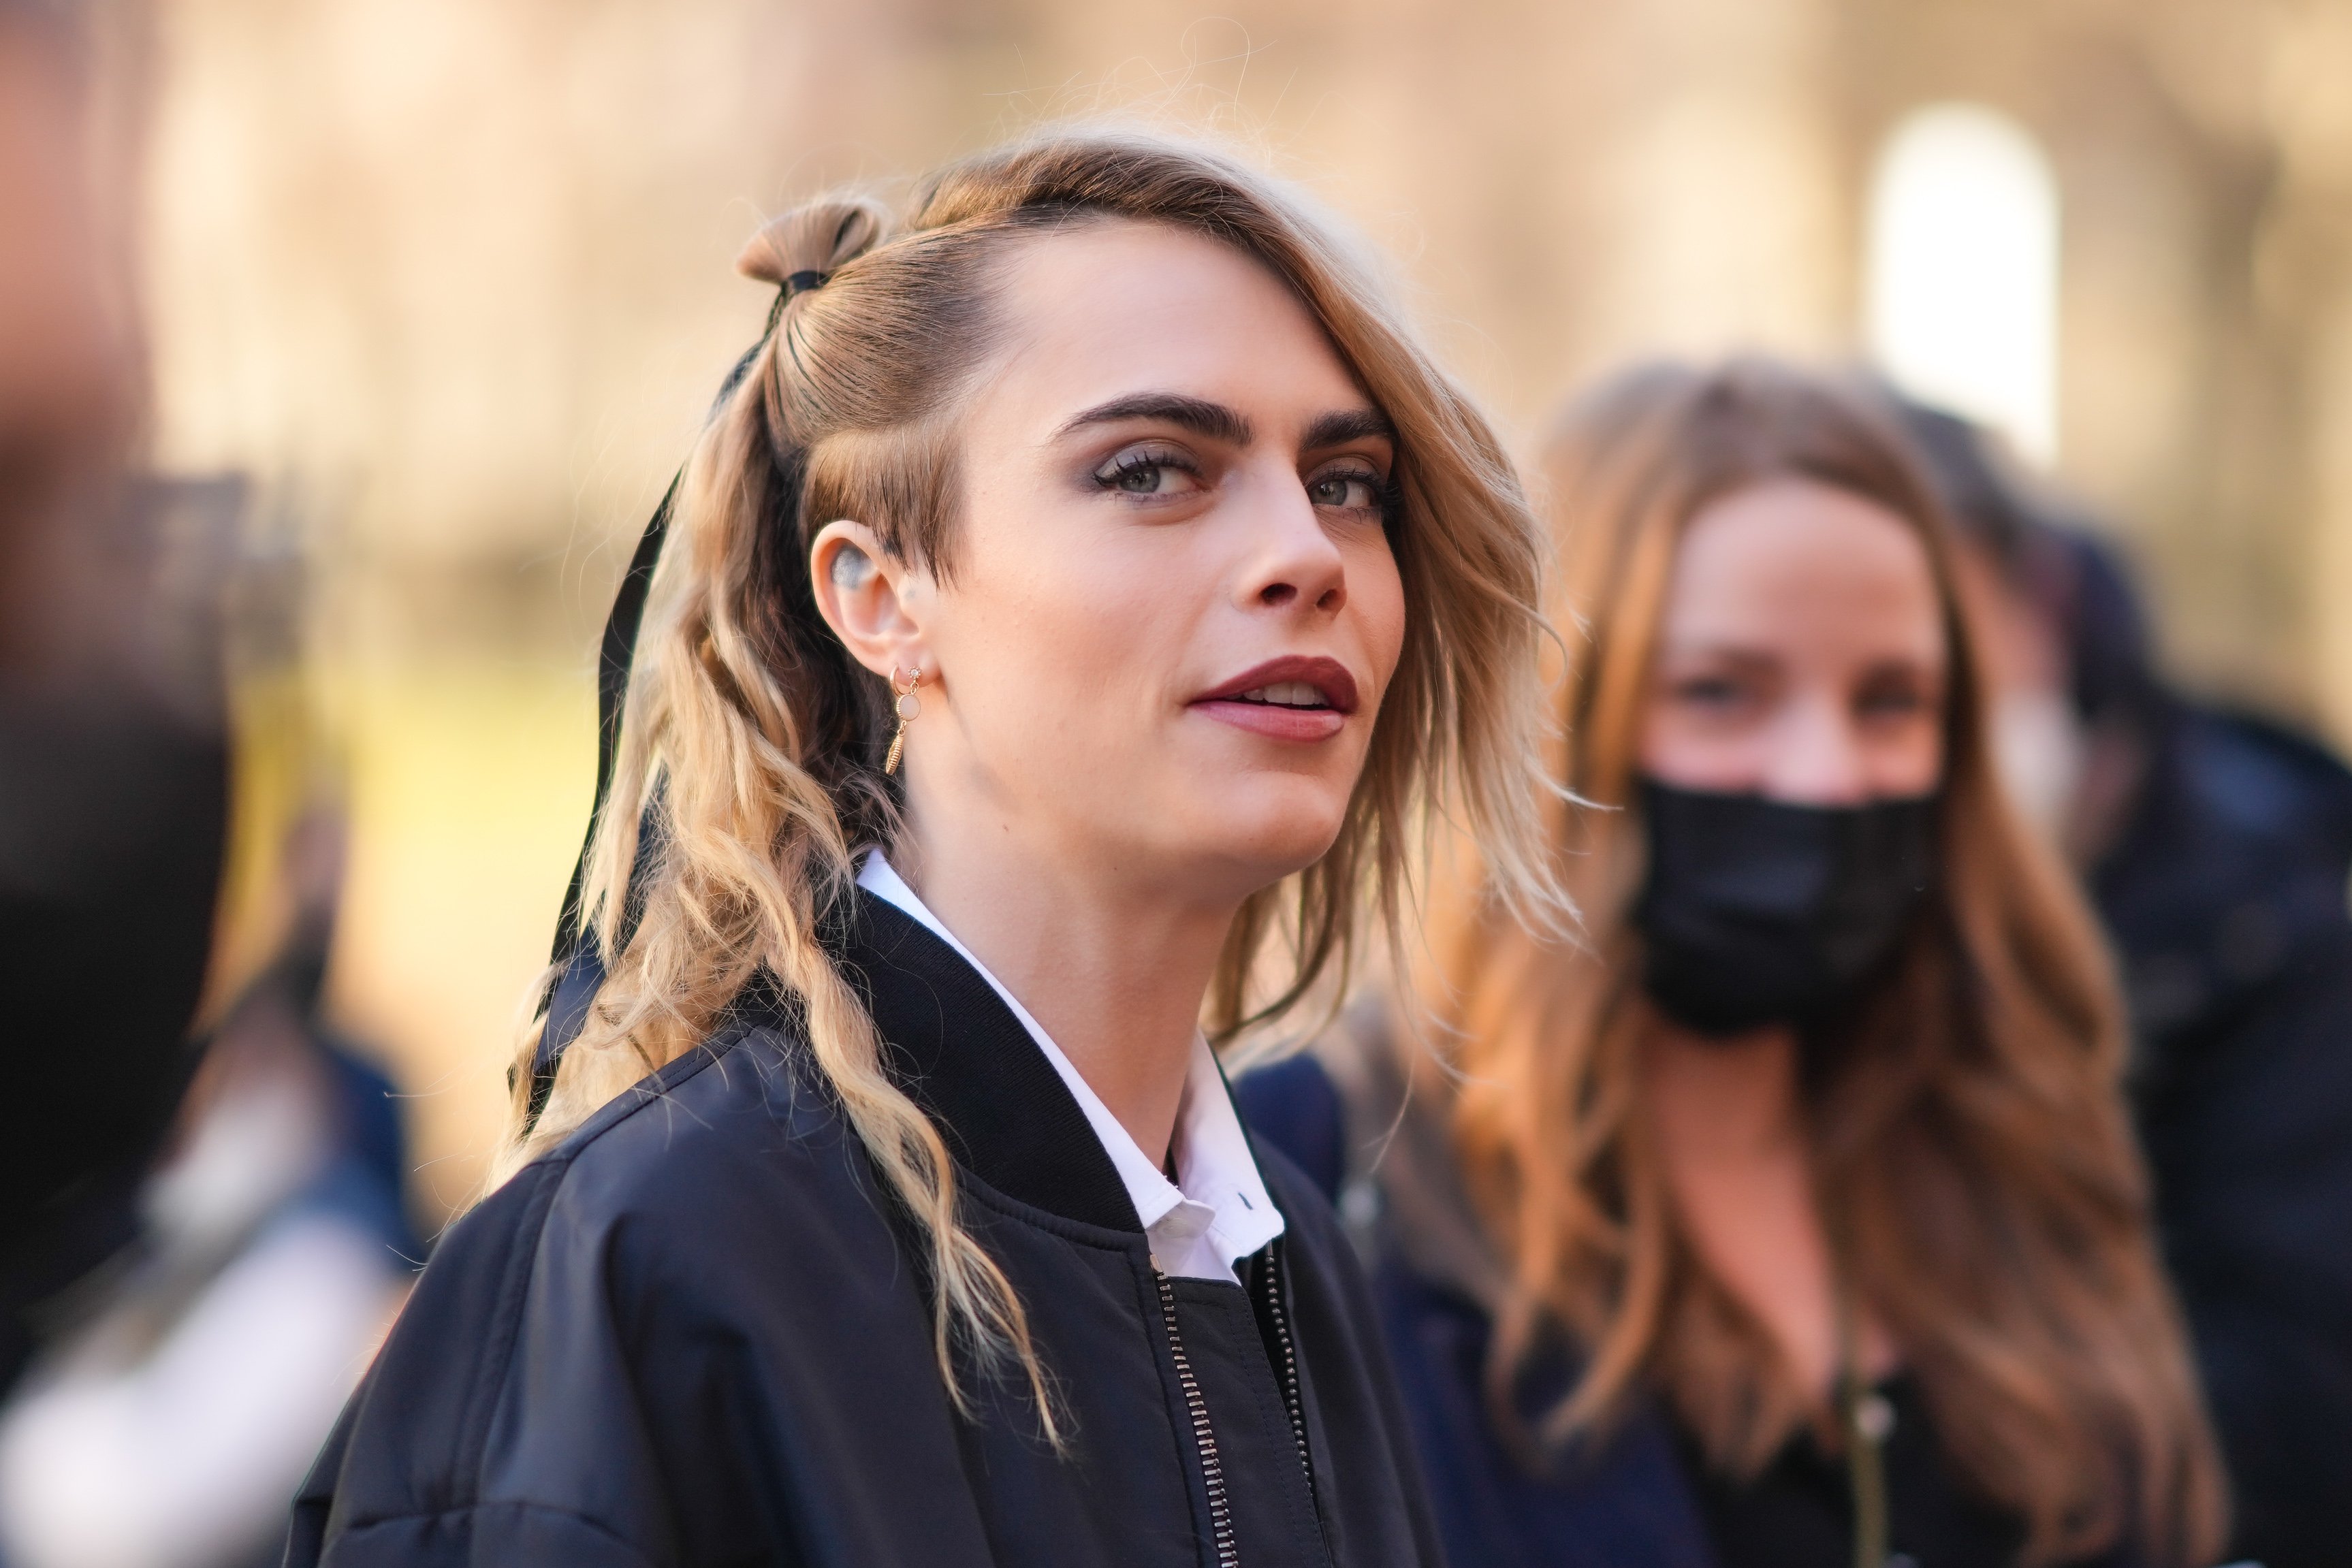 Cara Delevingne is seen, outside Dior, during Paris Fashion Week on January 24, 2022 in Paris, France | Source: Getty Images